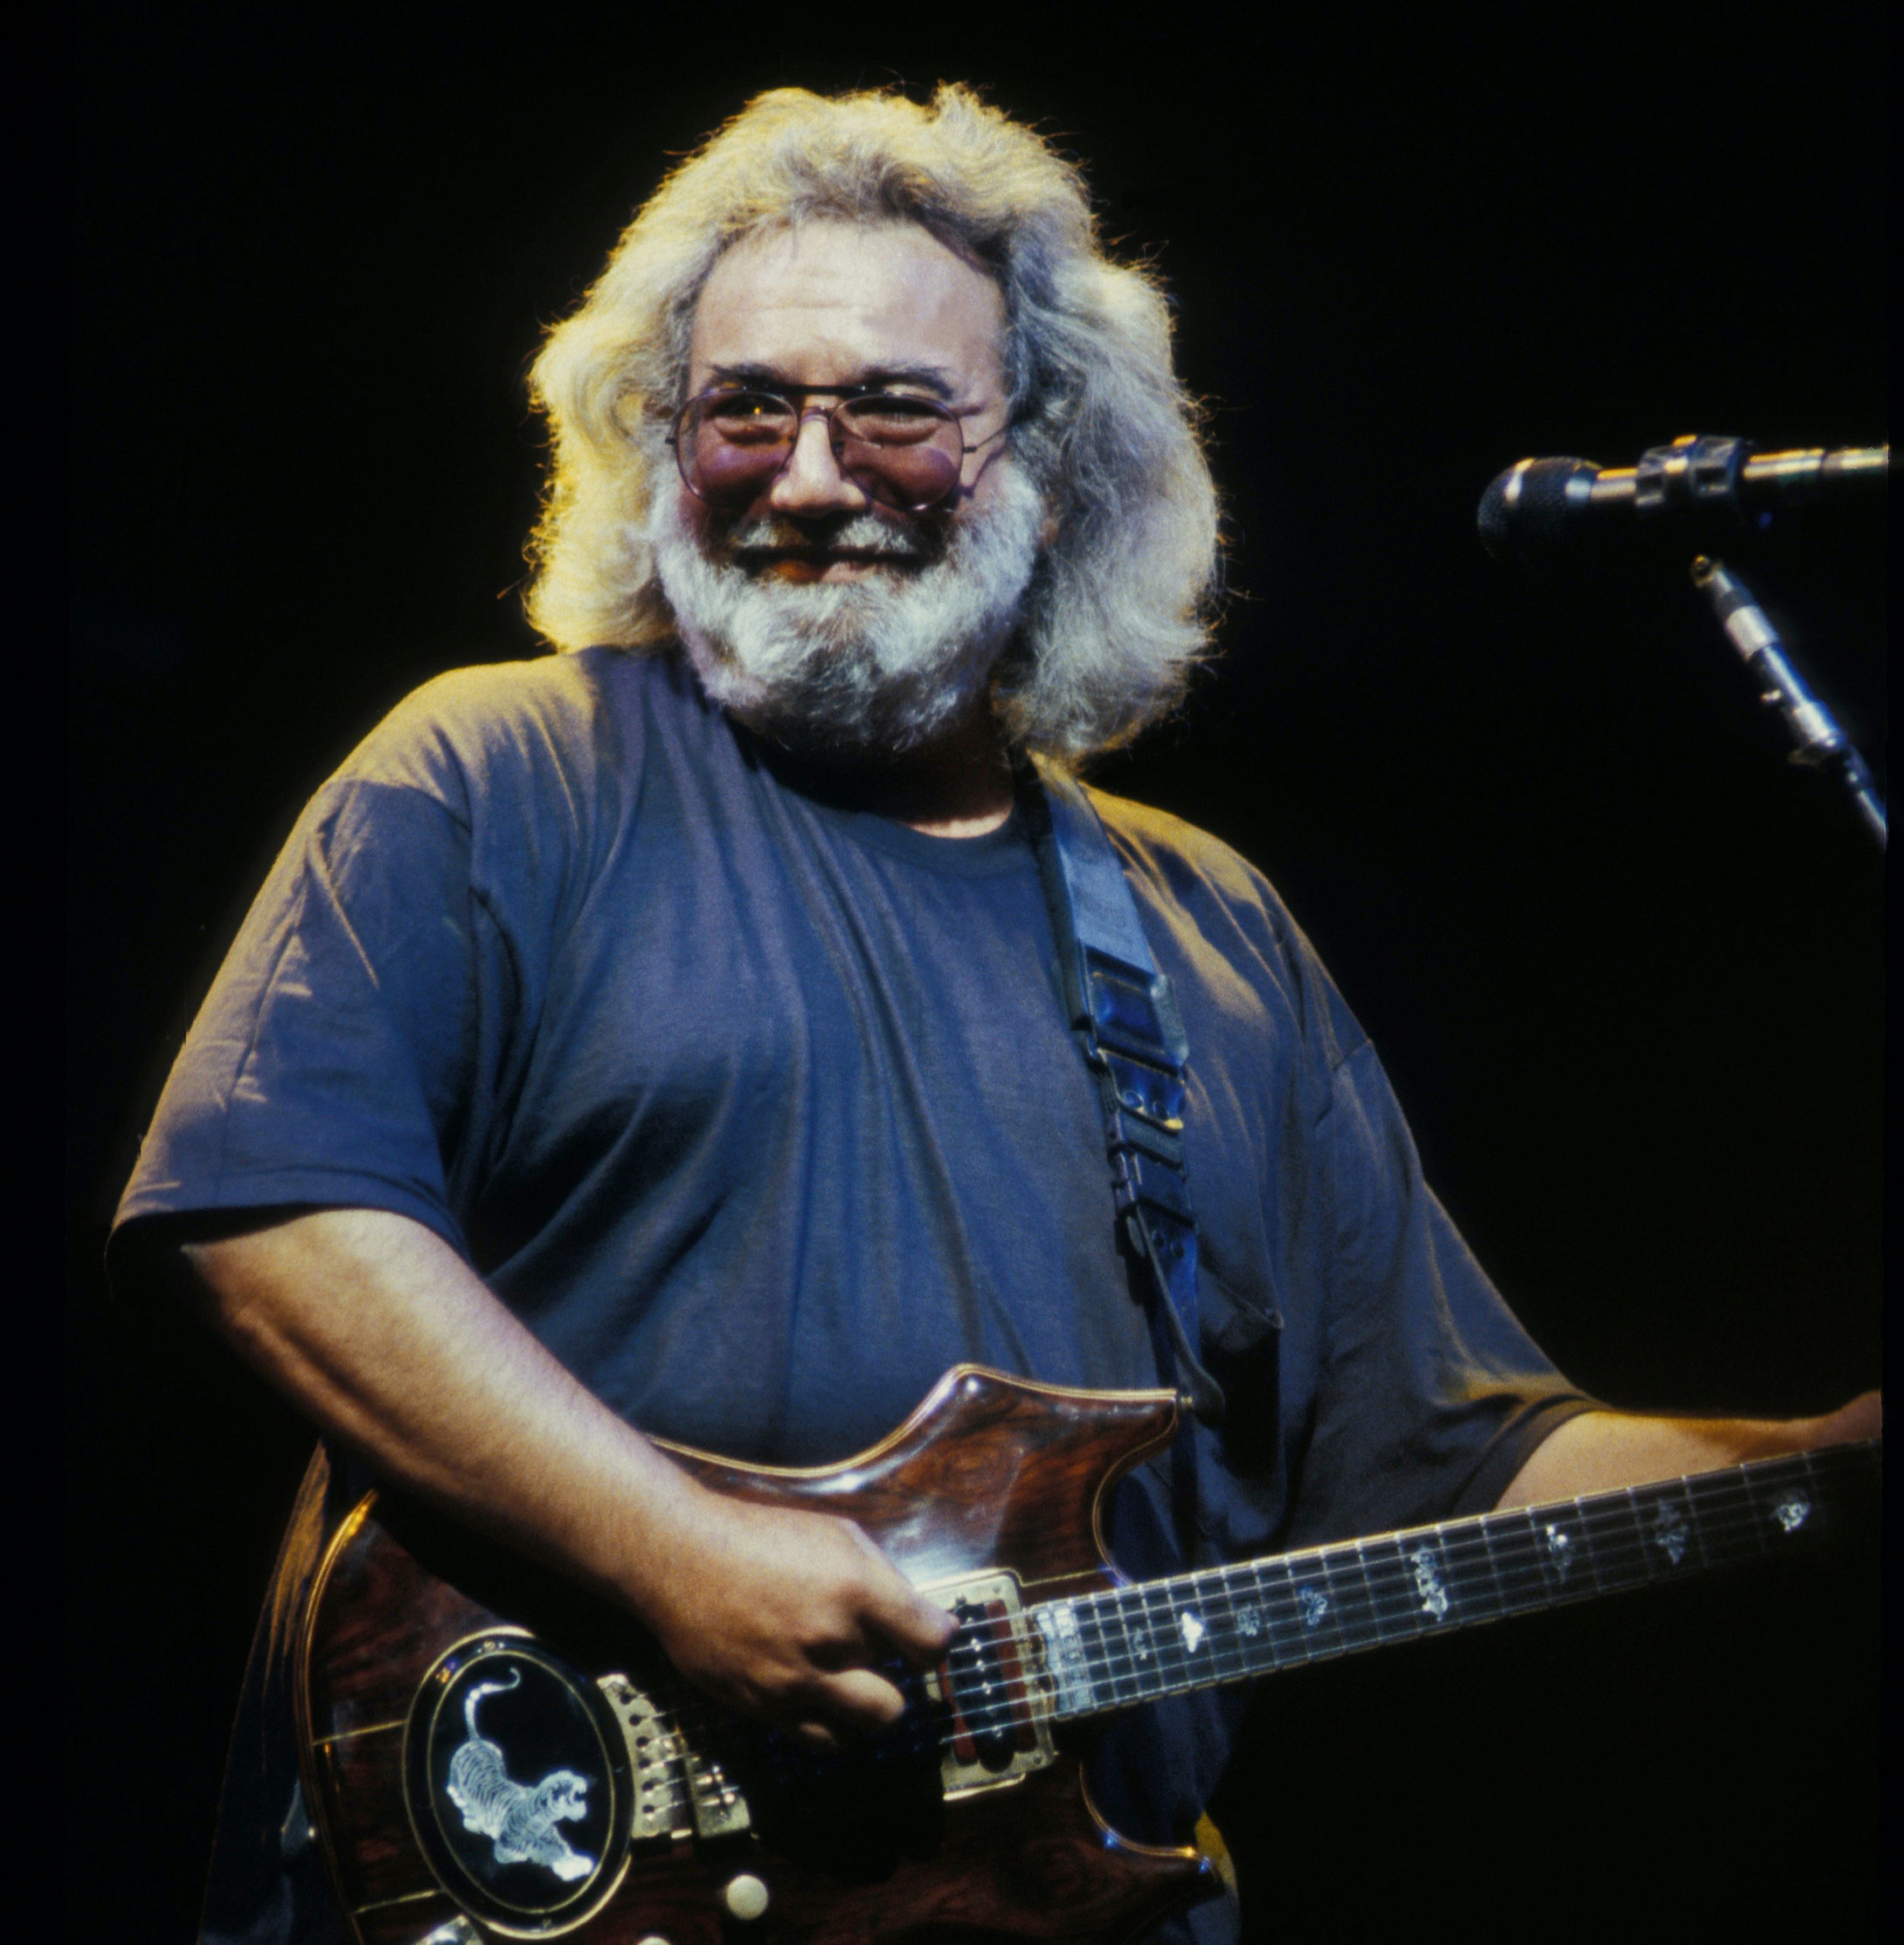 Premiere: Jerry Garcia Band “(What A) Wonderful World” from ‘GarciaLive Volume 16’